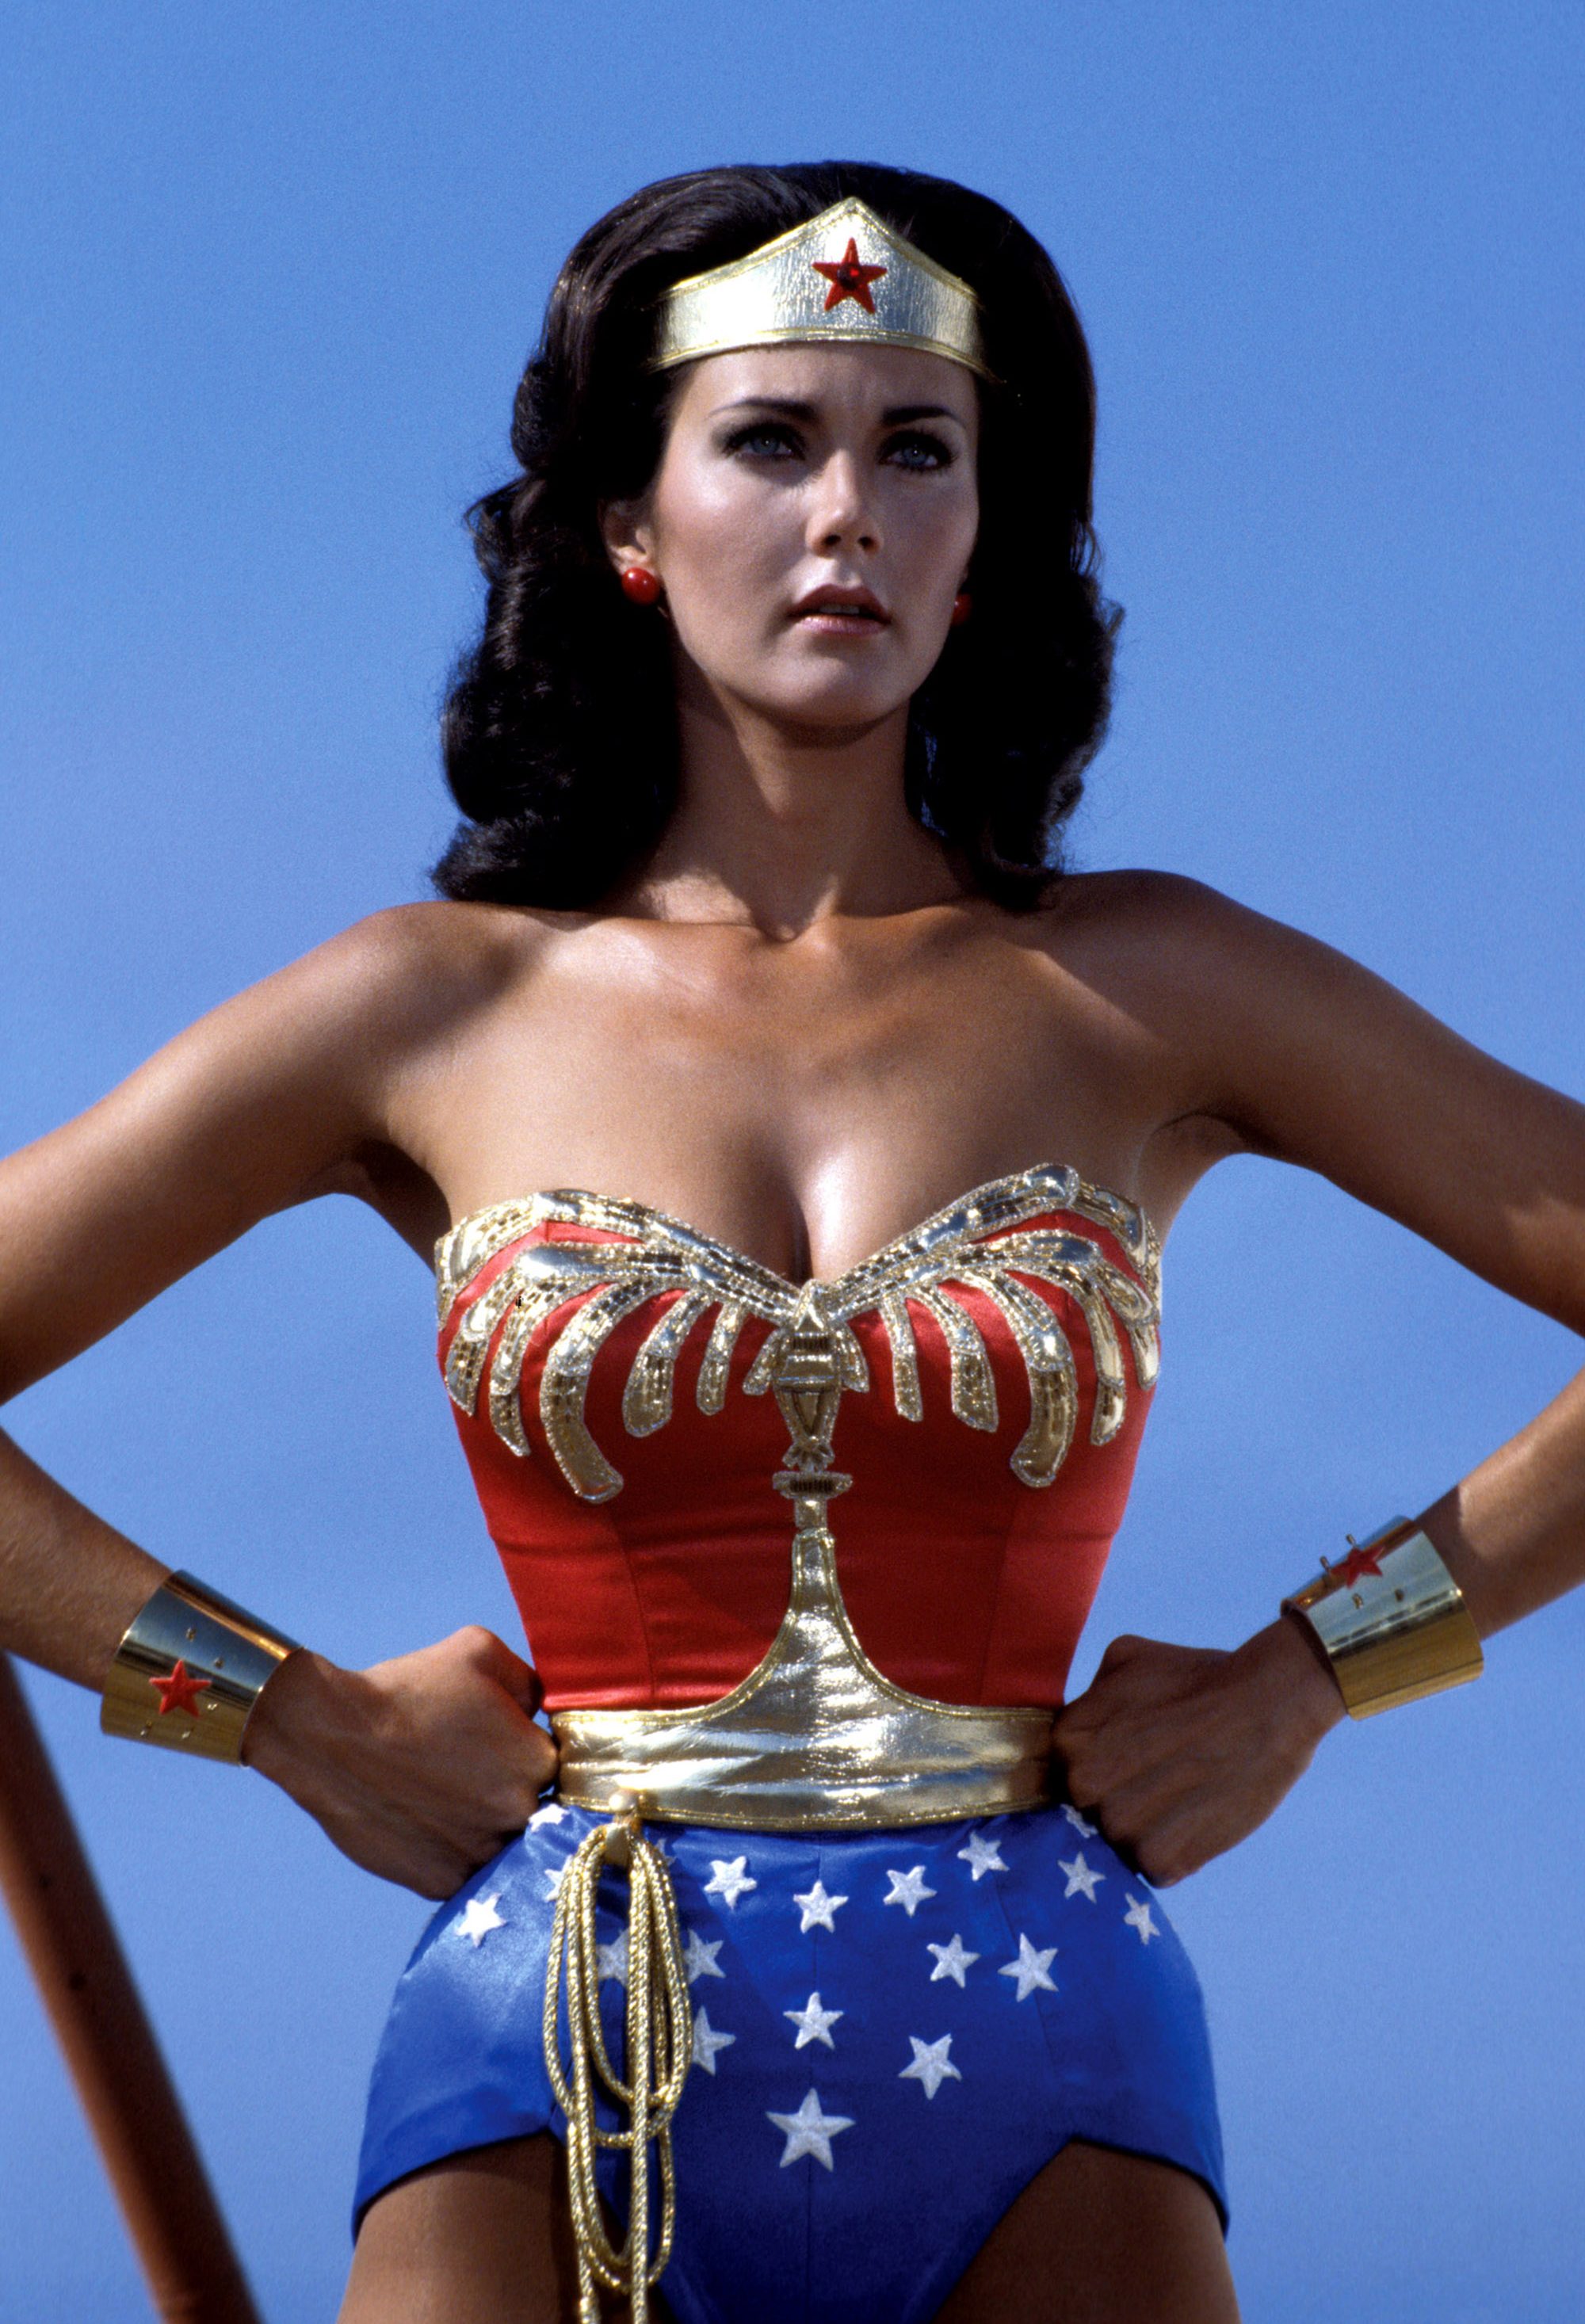 Carter played Wonder Woman in the eponymous CBS series which ran in the 1970s. 